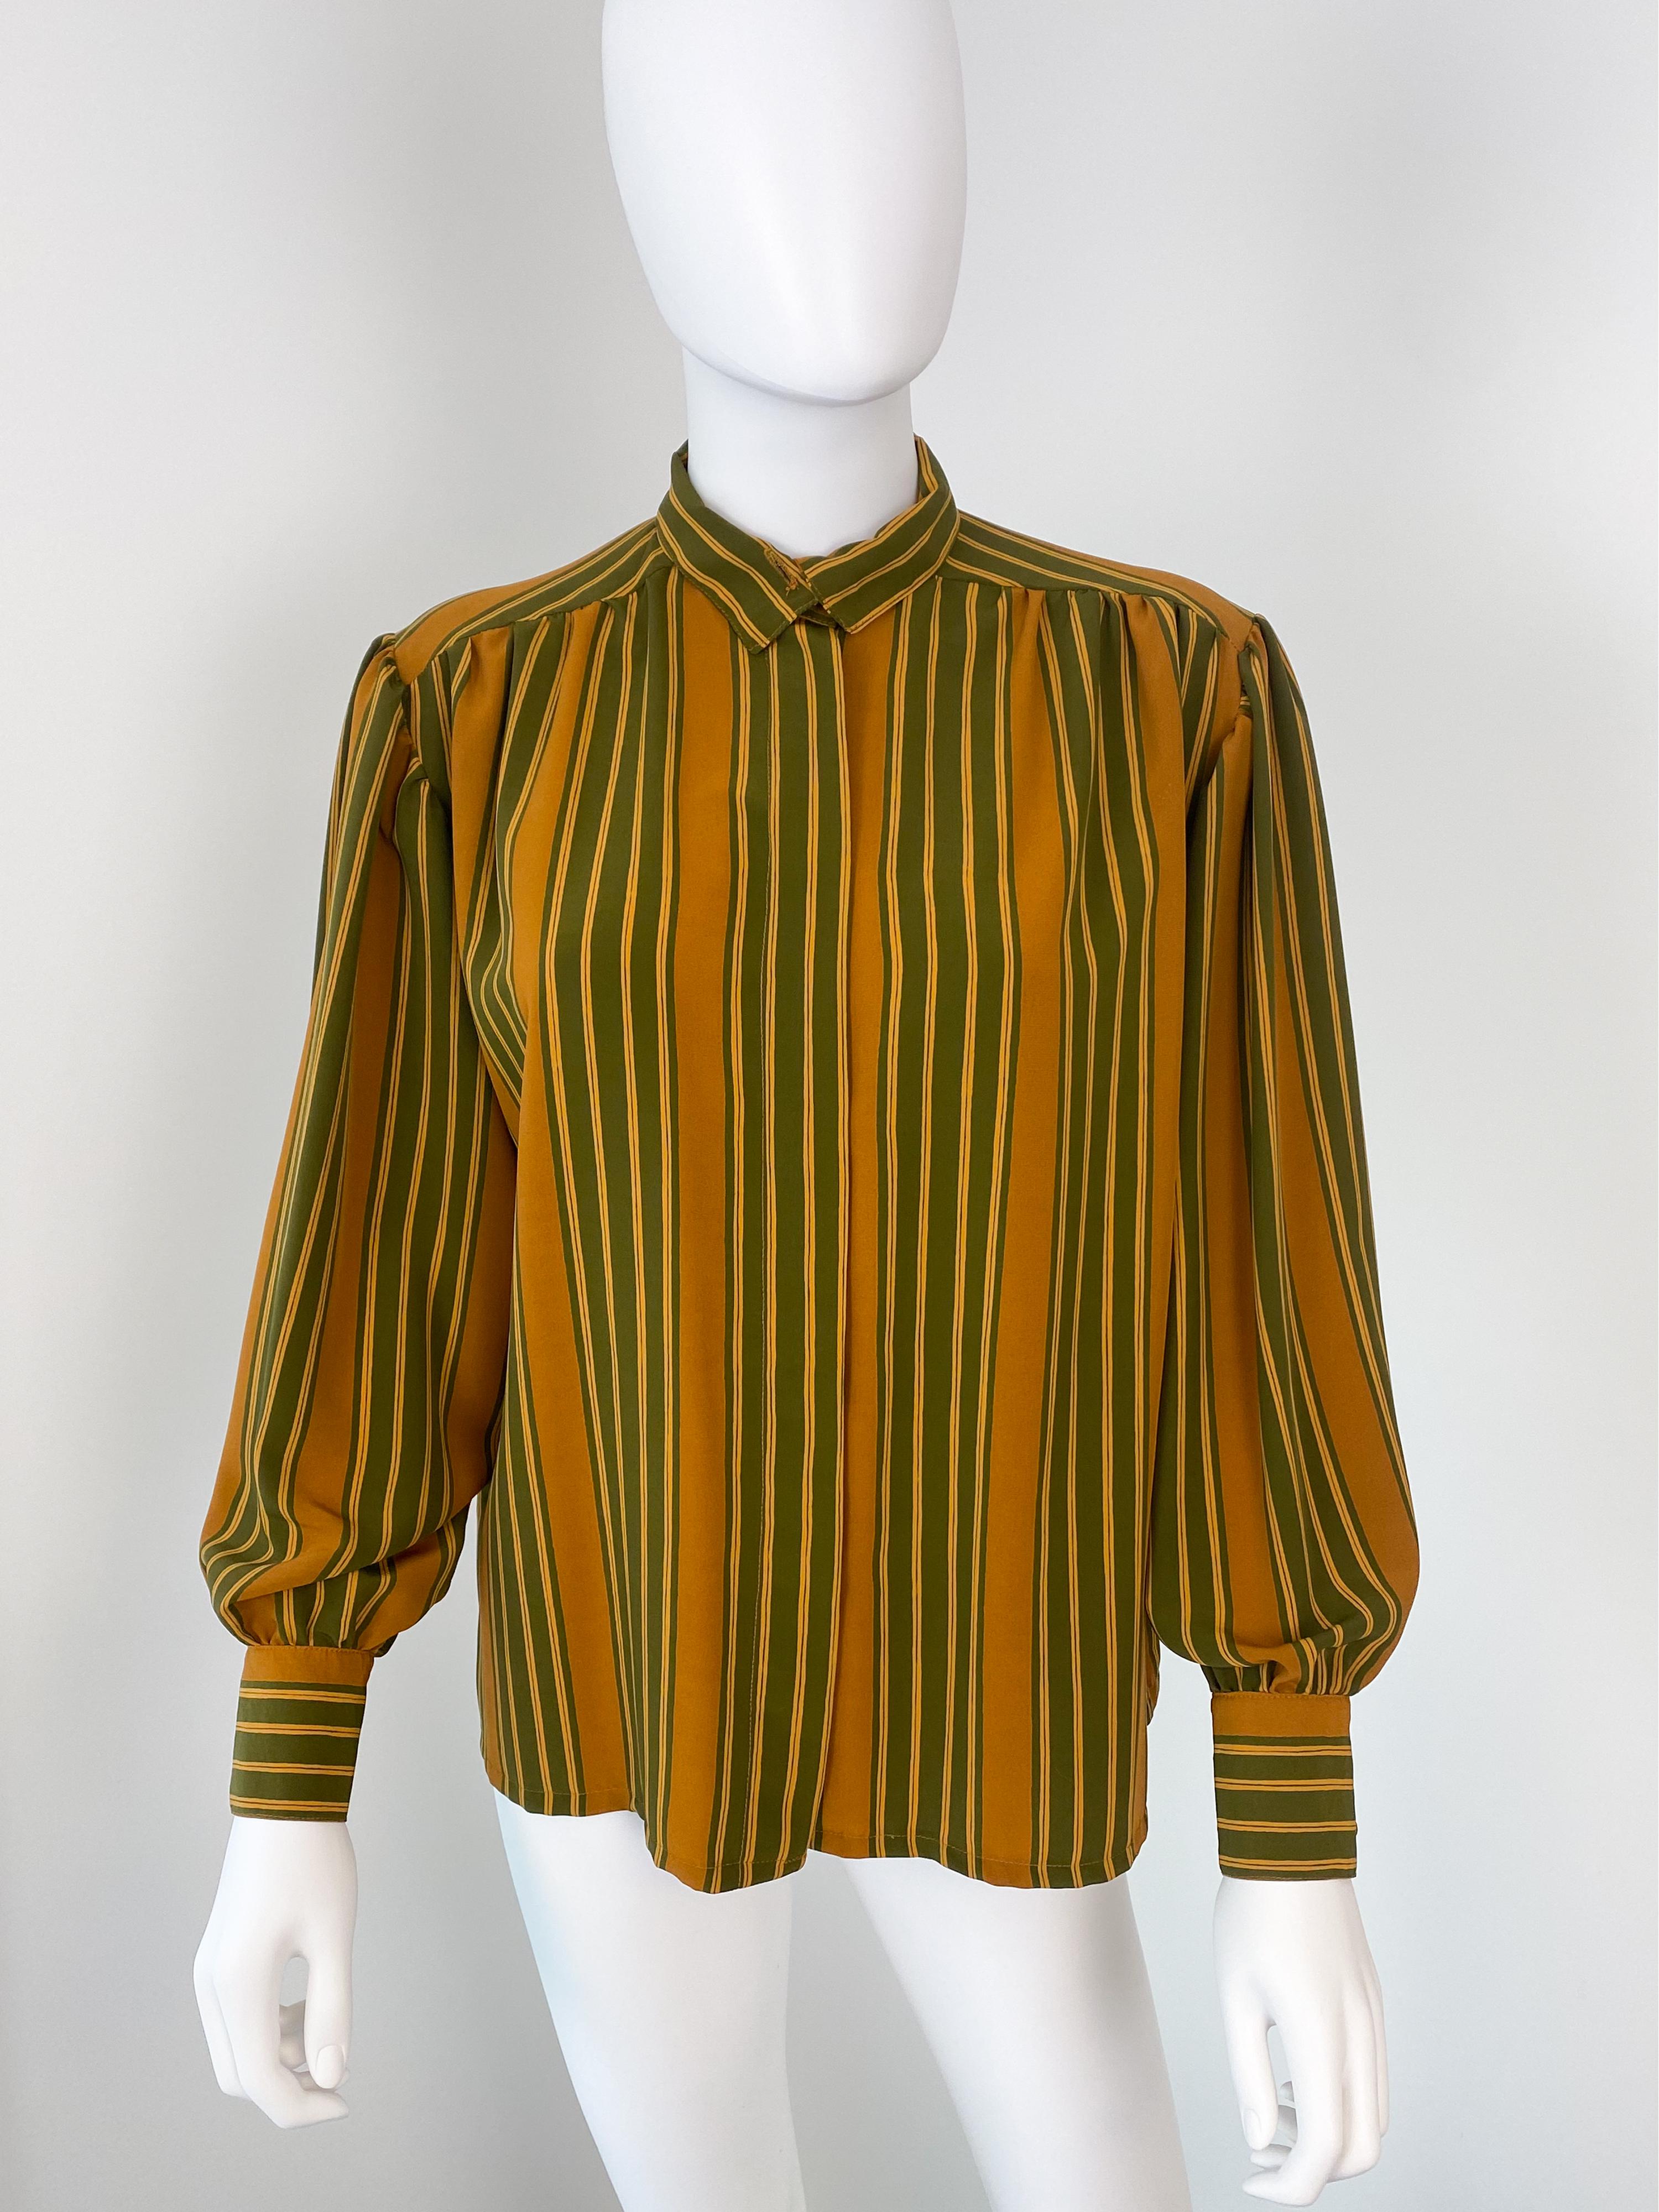 Women's Vintage 1980s Silky Polyester Blouse Top Green and Saffran Stripes Size 10/12 For Sale